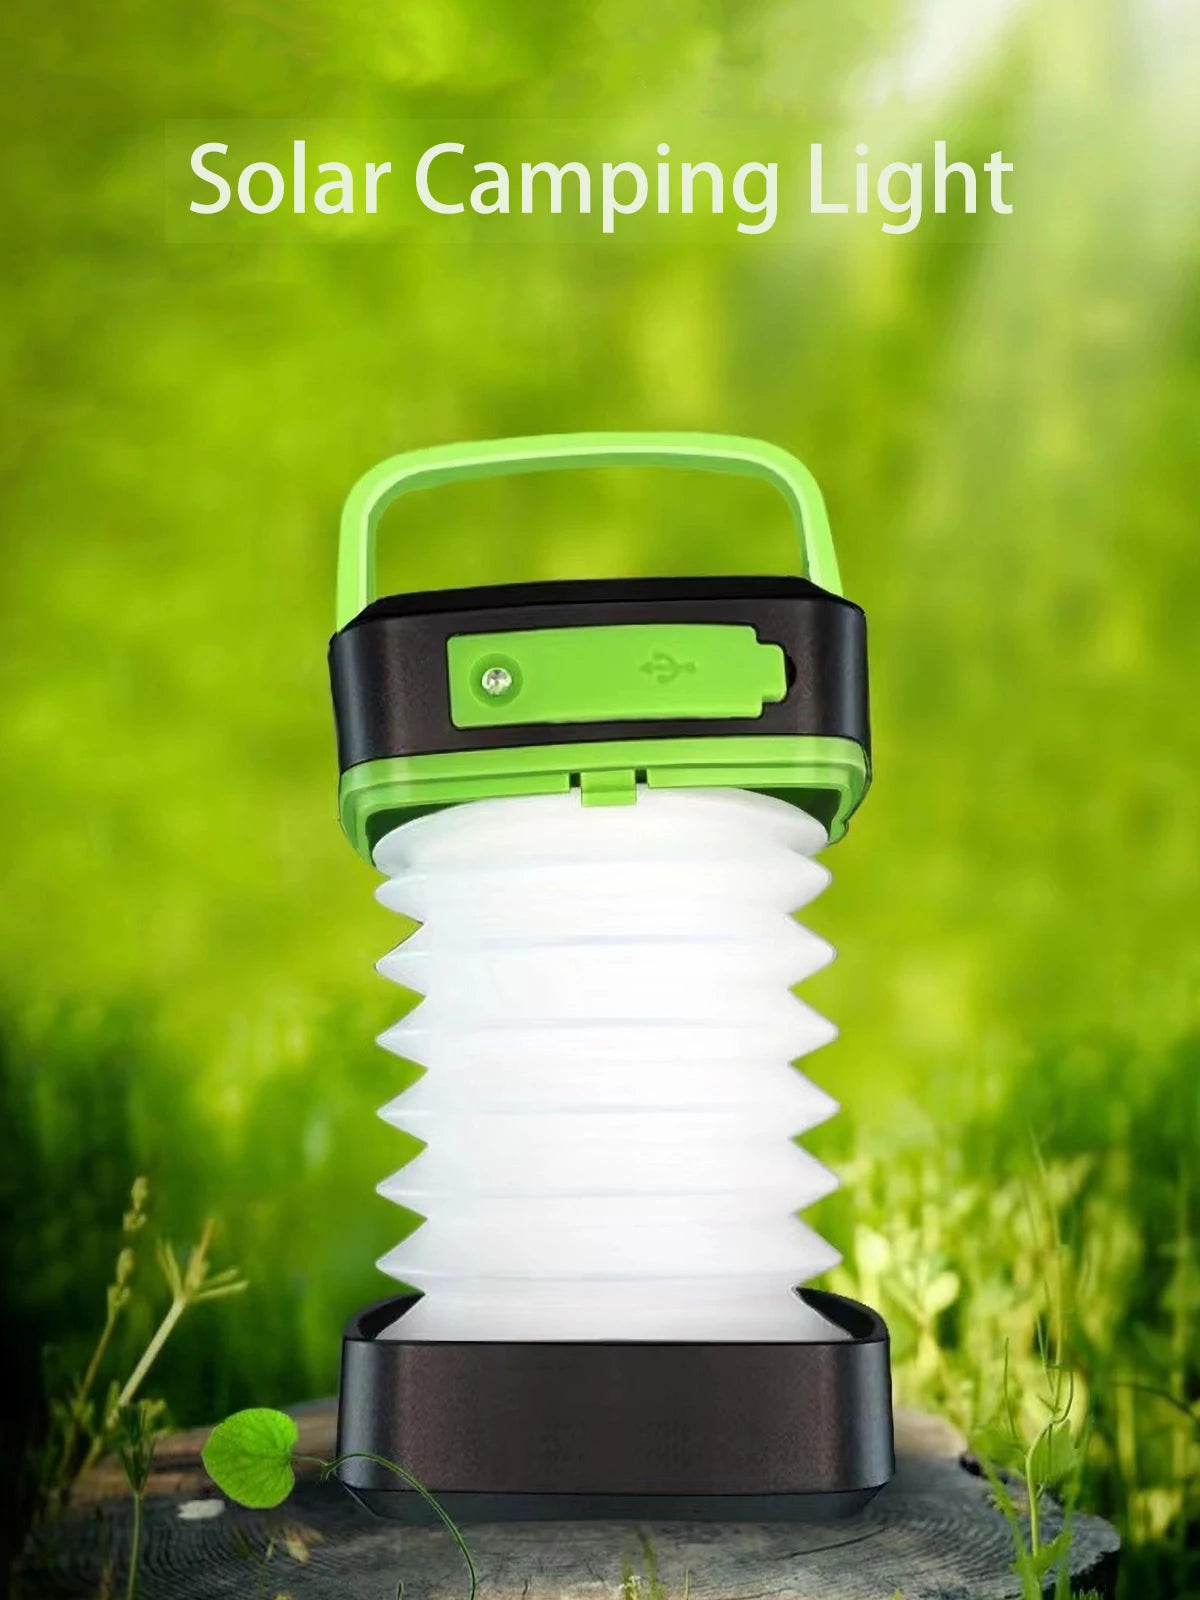 Solar Light, Compact solar-powered lantern with USB charging and adjustable brightness.